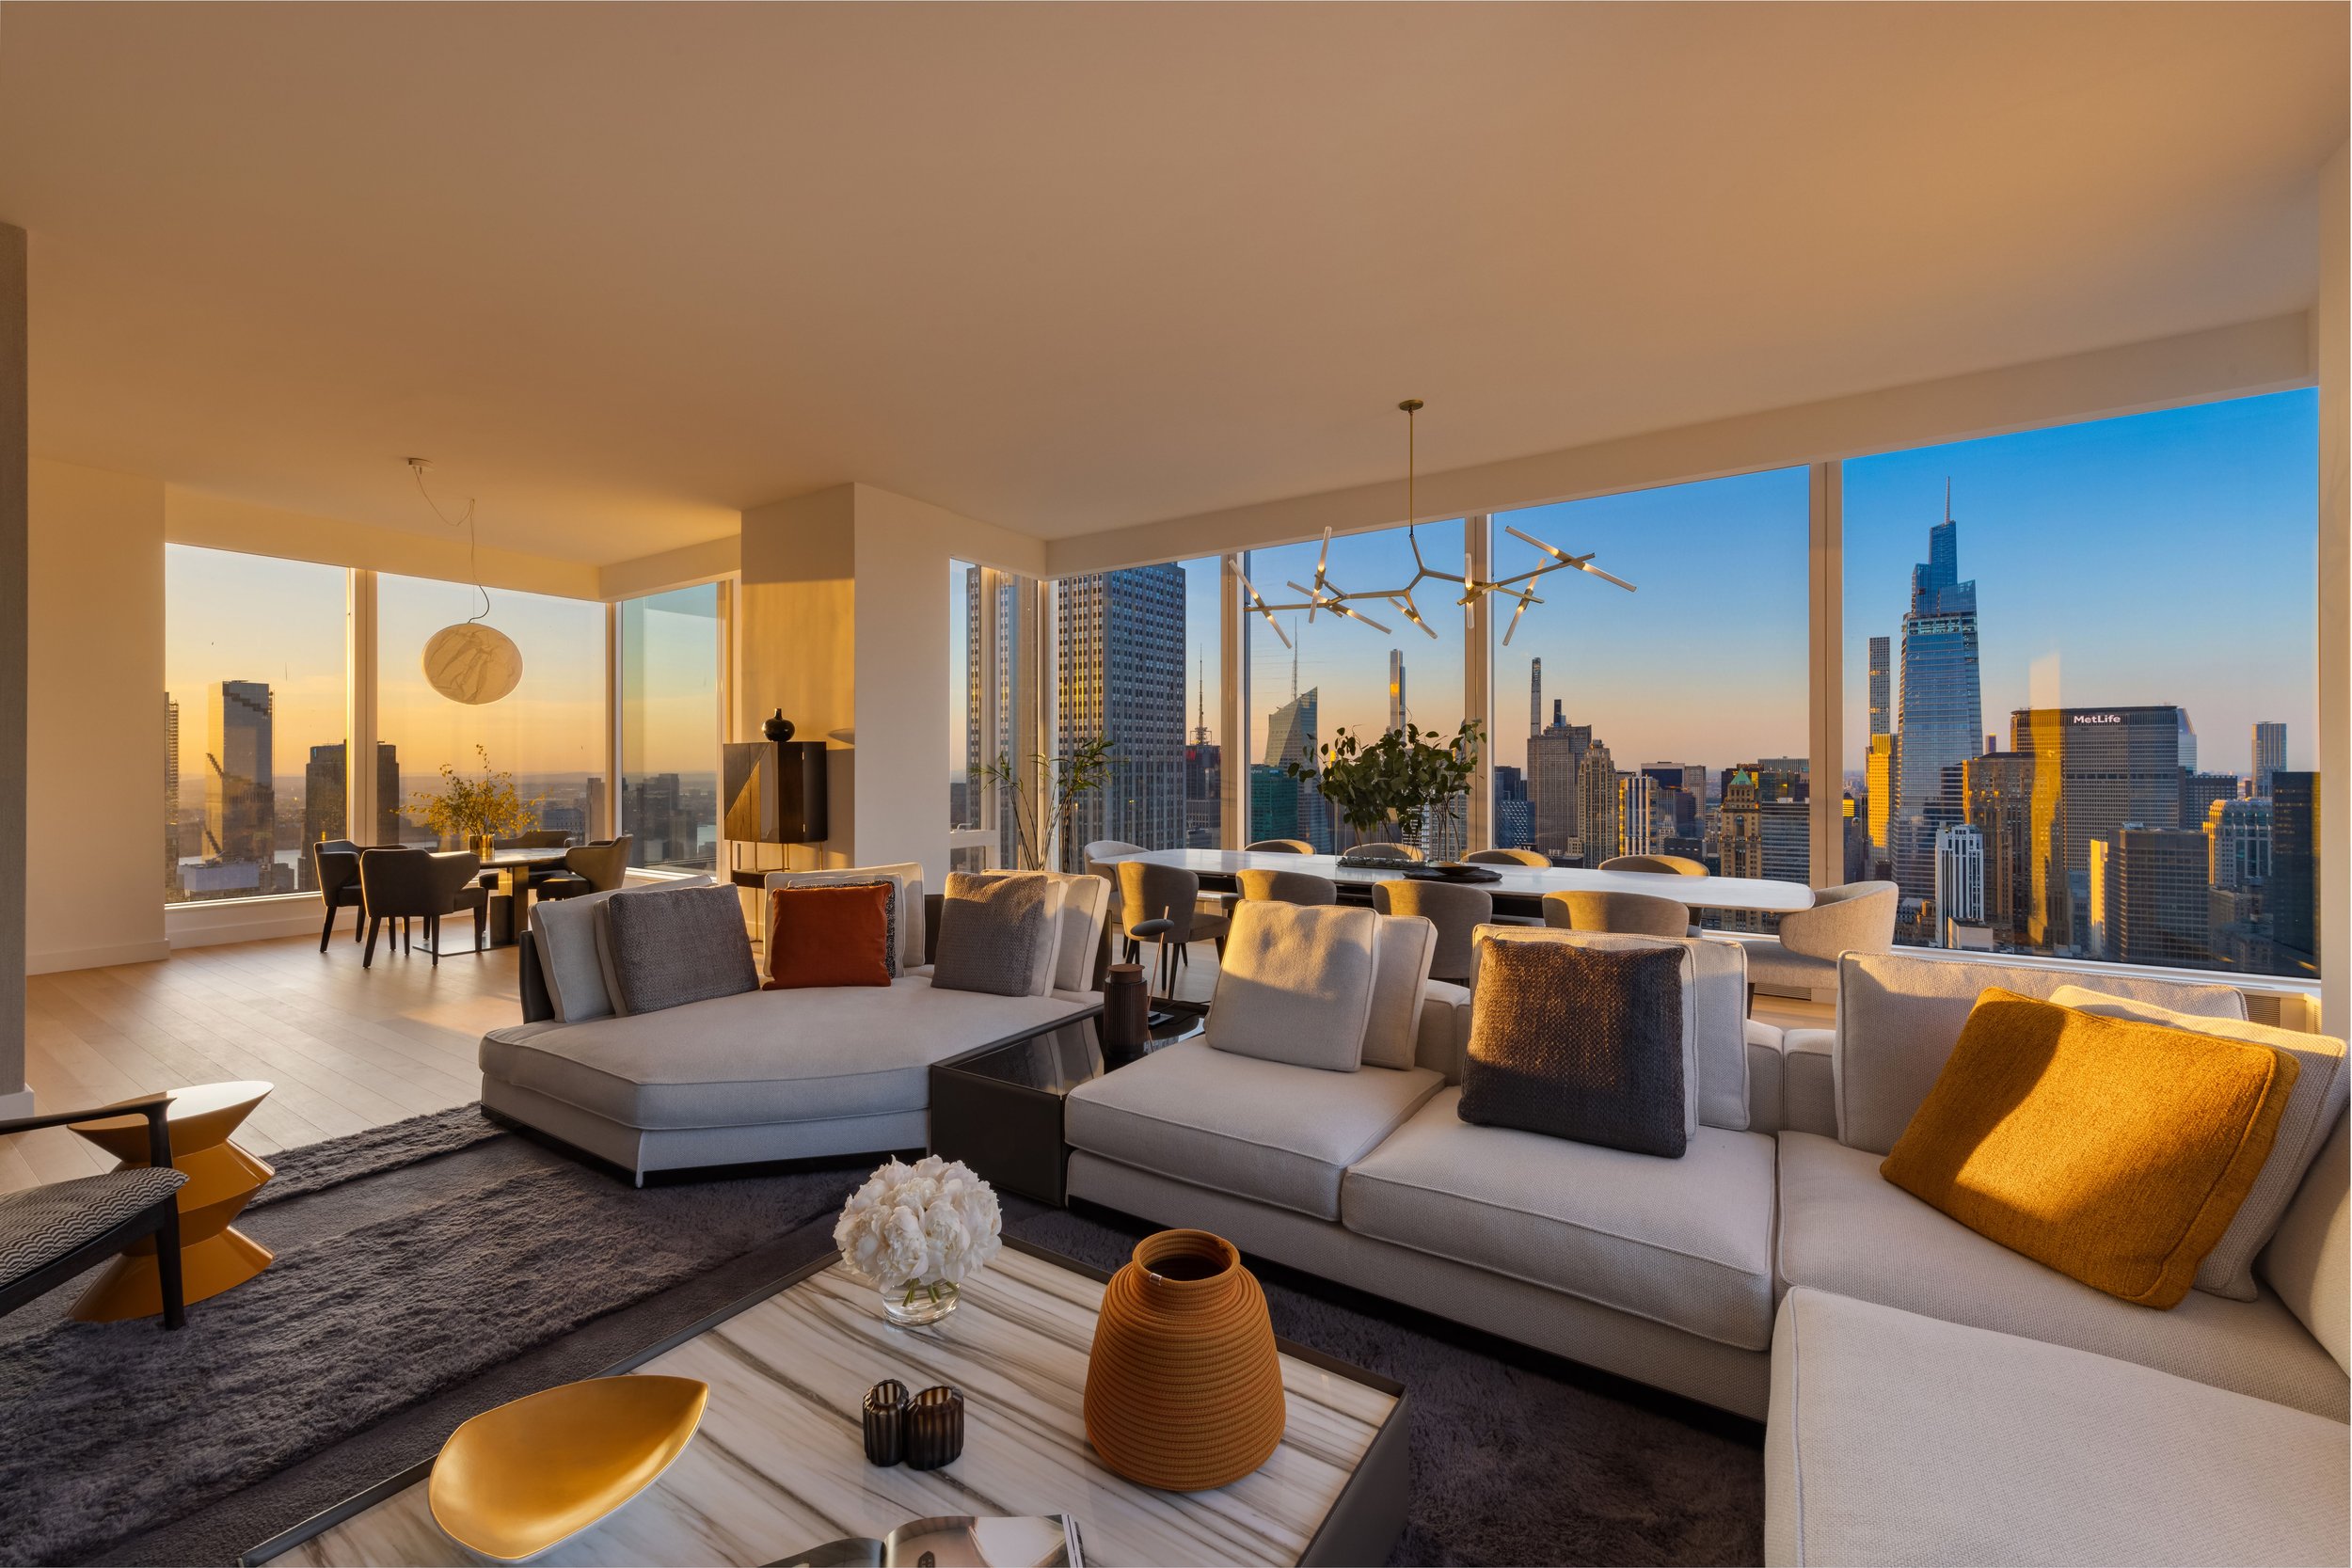  In the heart of stylish NoMad, Madison House offers unsurpassed panoramic views of New York City, where every residence has a corner window and 11-foot ceilings or higher. With architecture by Handel and interiors by Gachot, these homes start 150 fe